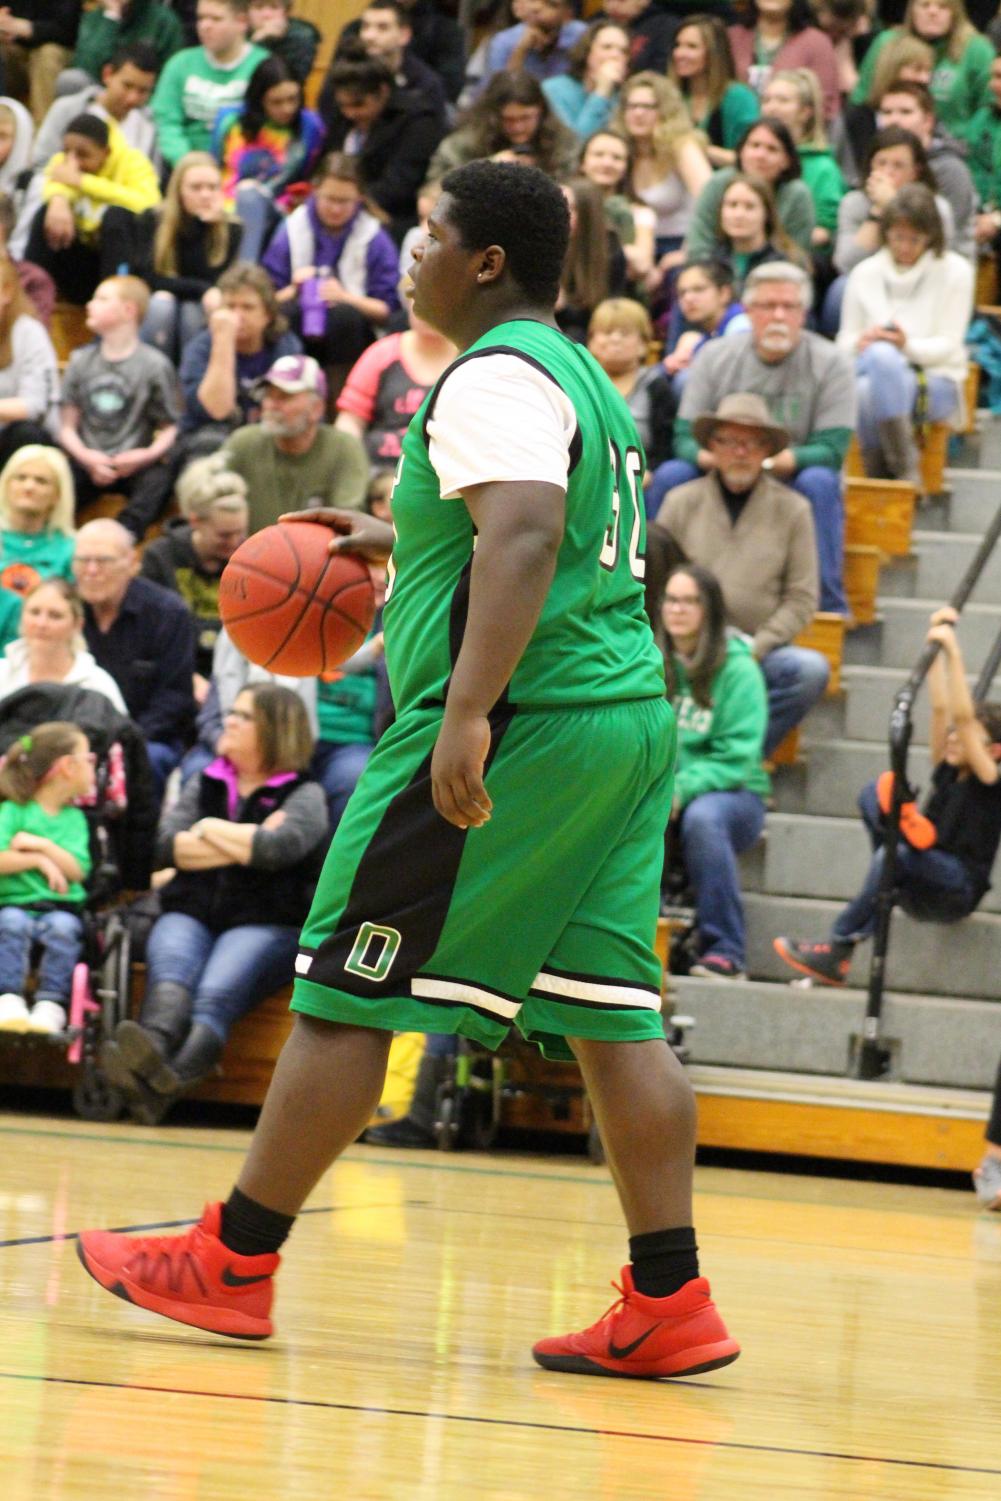 Panther+Pals+basketball+game+photo+gallery+%28photos+by+Kaitlyn+Strobel%29